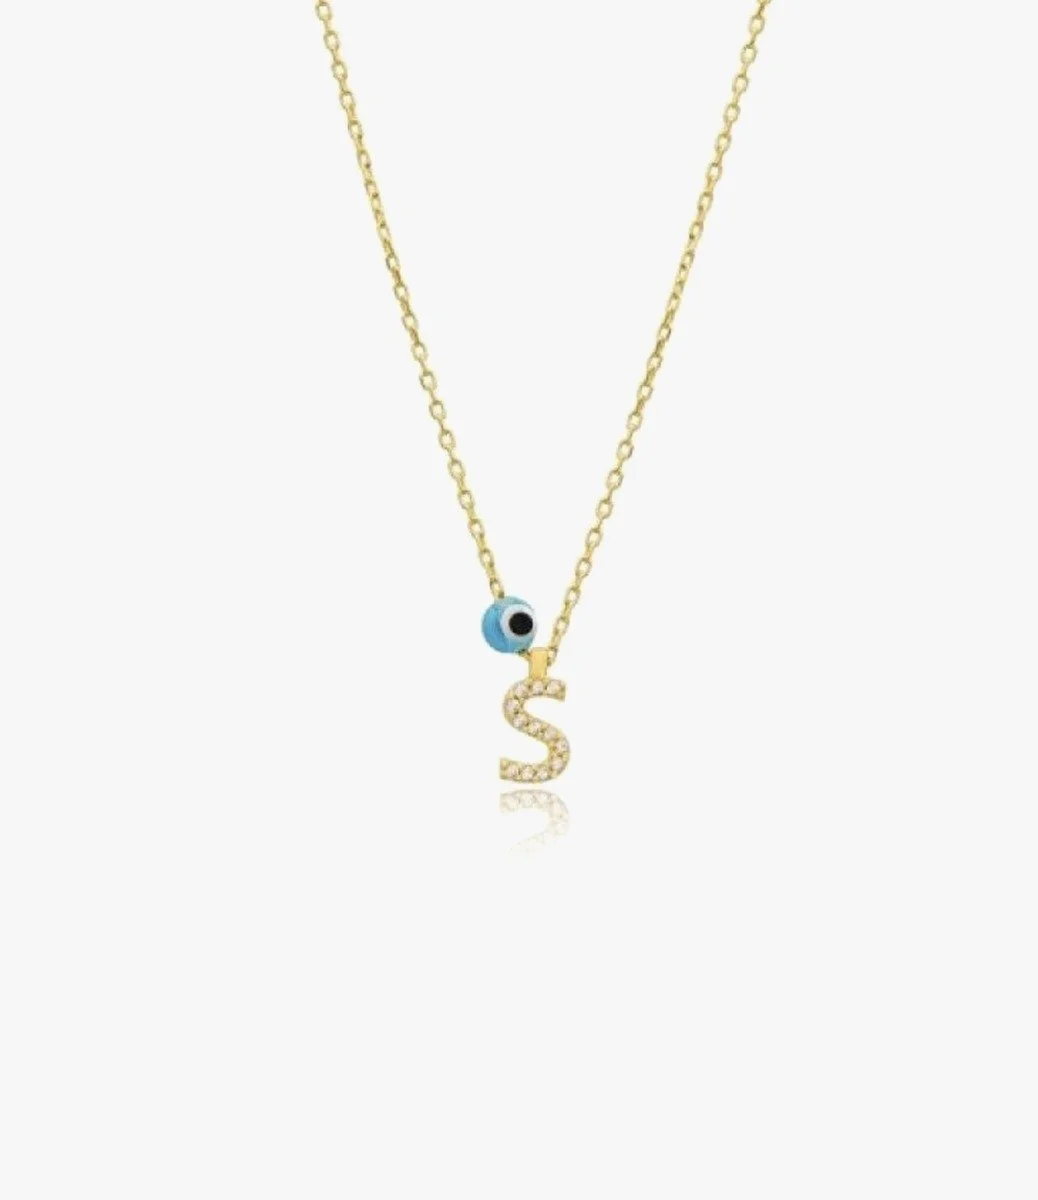 Gold Glittery Necklace With the Letter S and Blue Bead